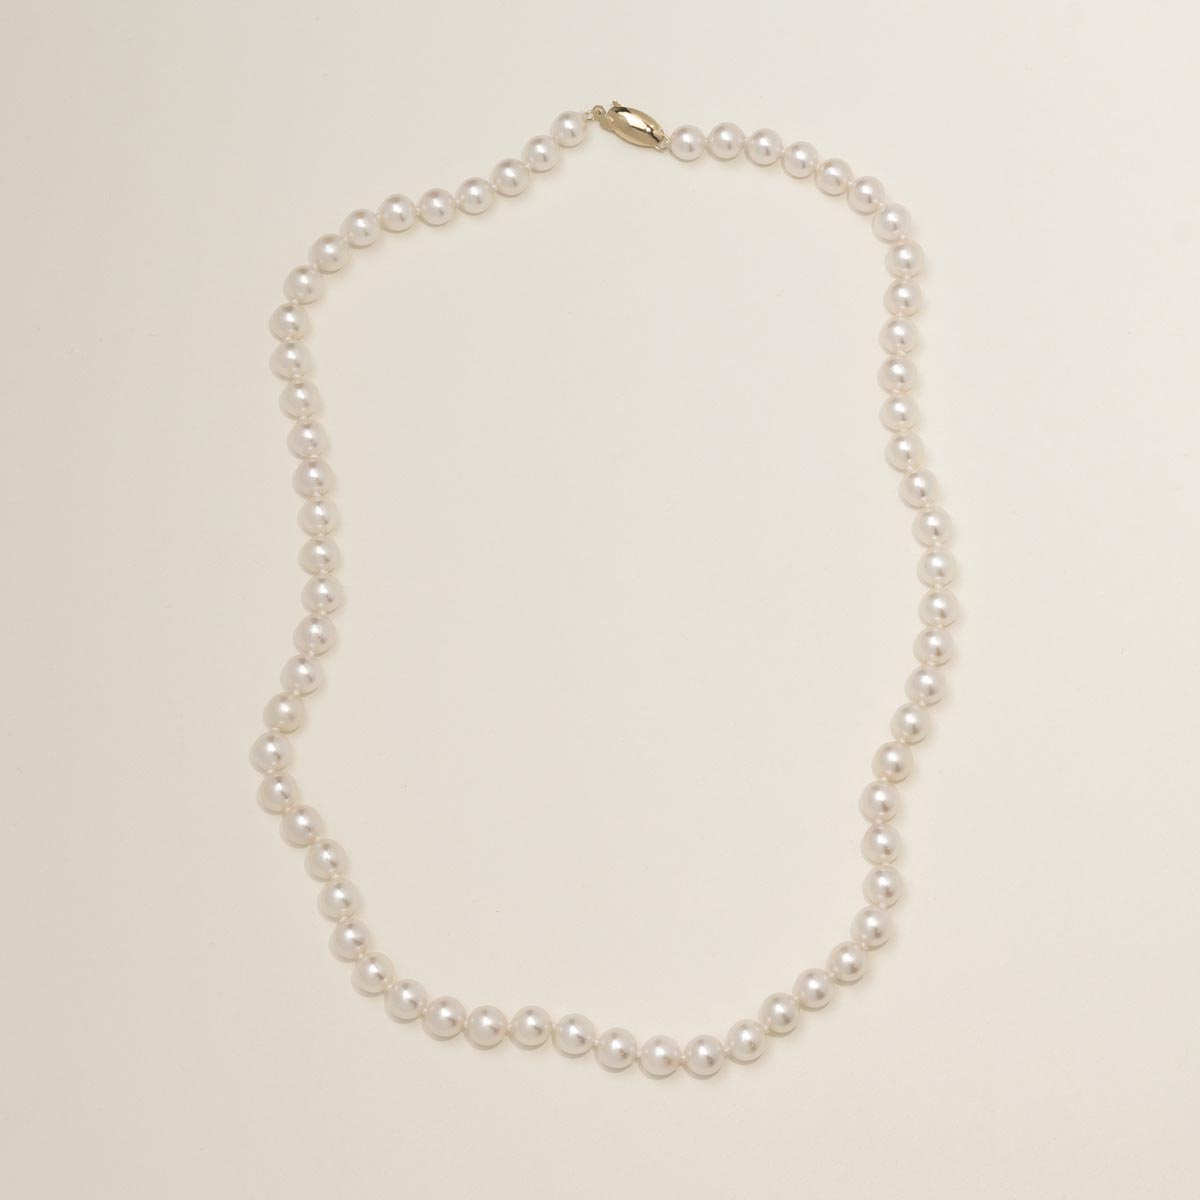 Mastoloni Cultured Akoya Pearl Strand Necklace in 14kt Yellow Gold (6-6.5mm pearls)